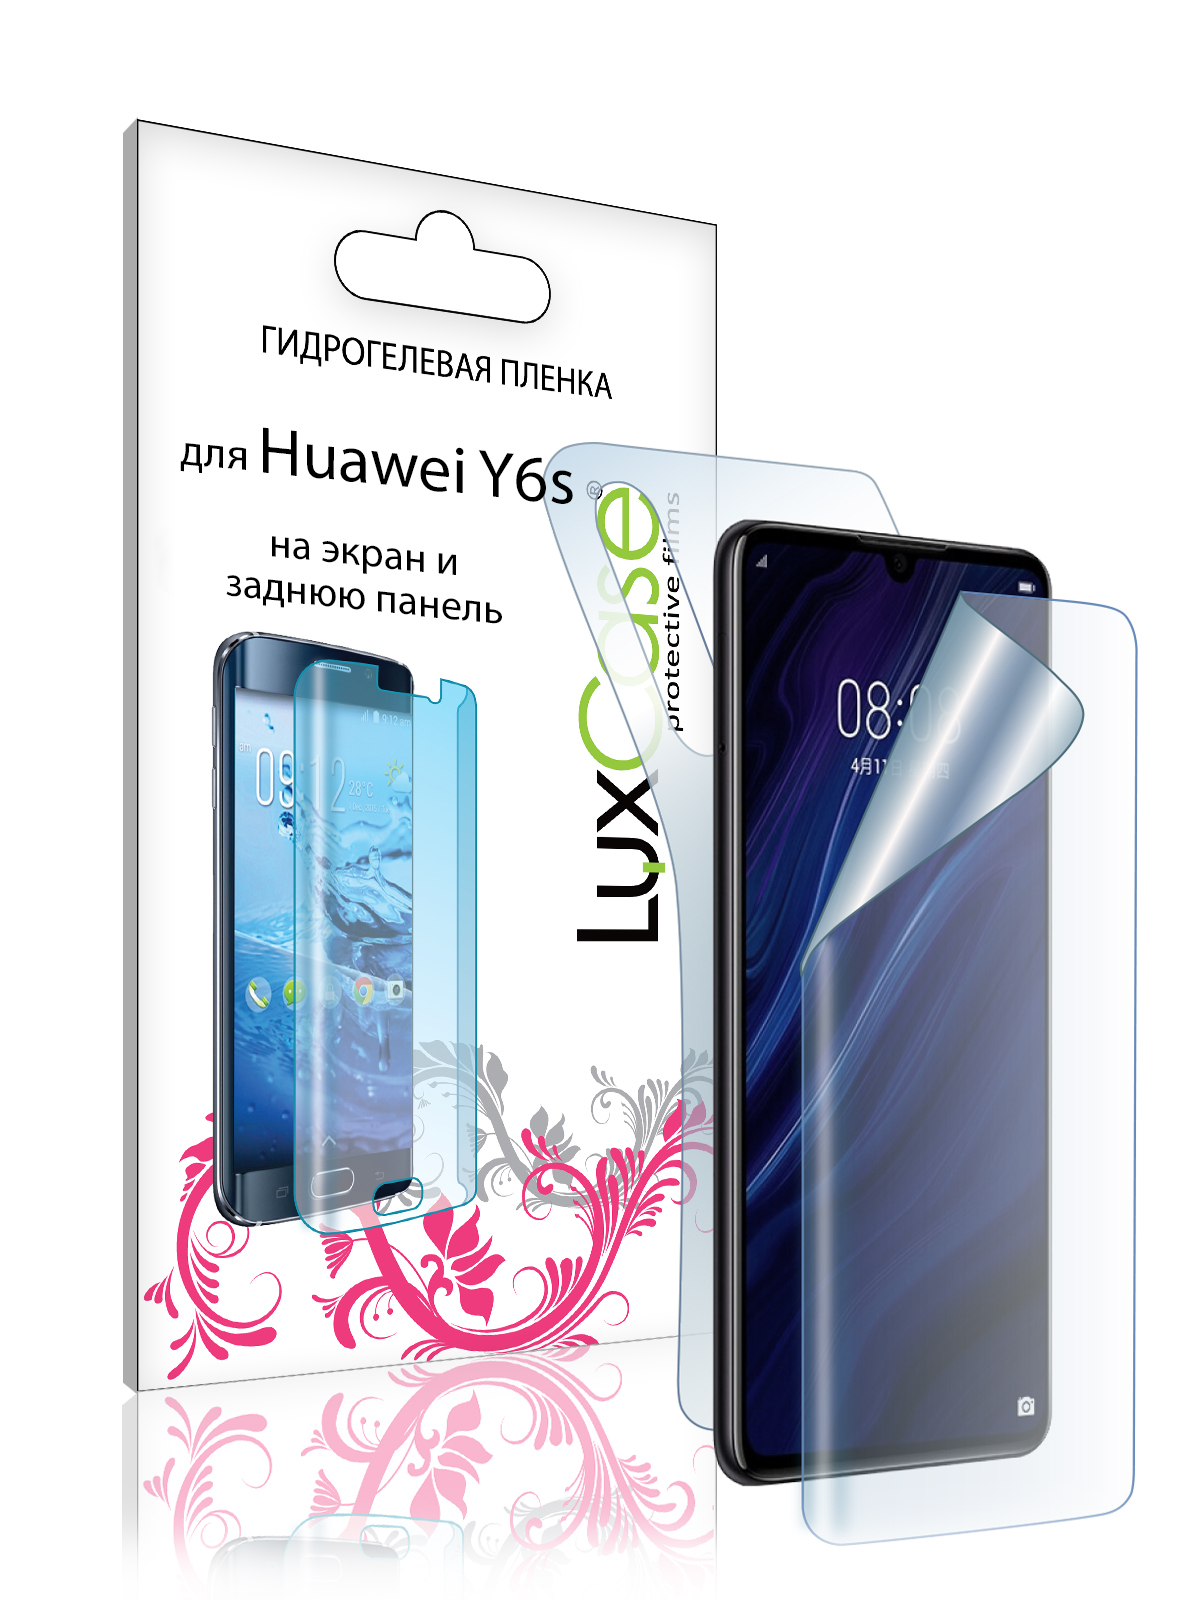 Пленка гидрогелевая LuxCase для Huawei Y6S 0.14mm Front and Back Transperent 86687 гидрогелевая пленка luxcase для huawei y6s 0 14mm front and back transperent 86687